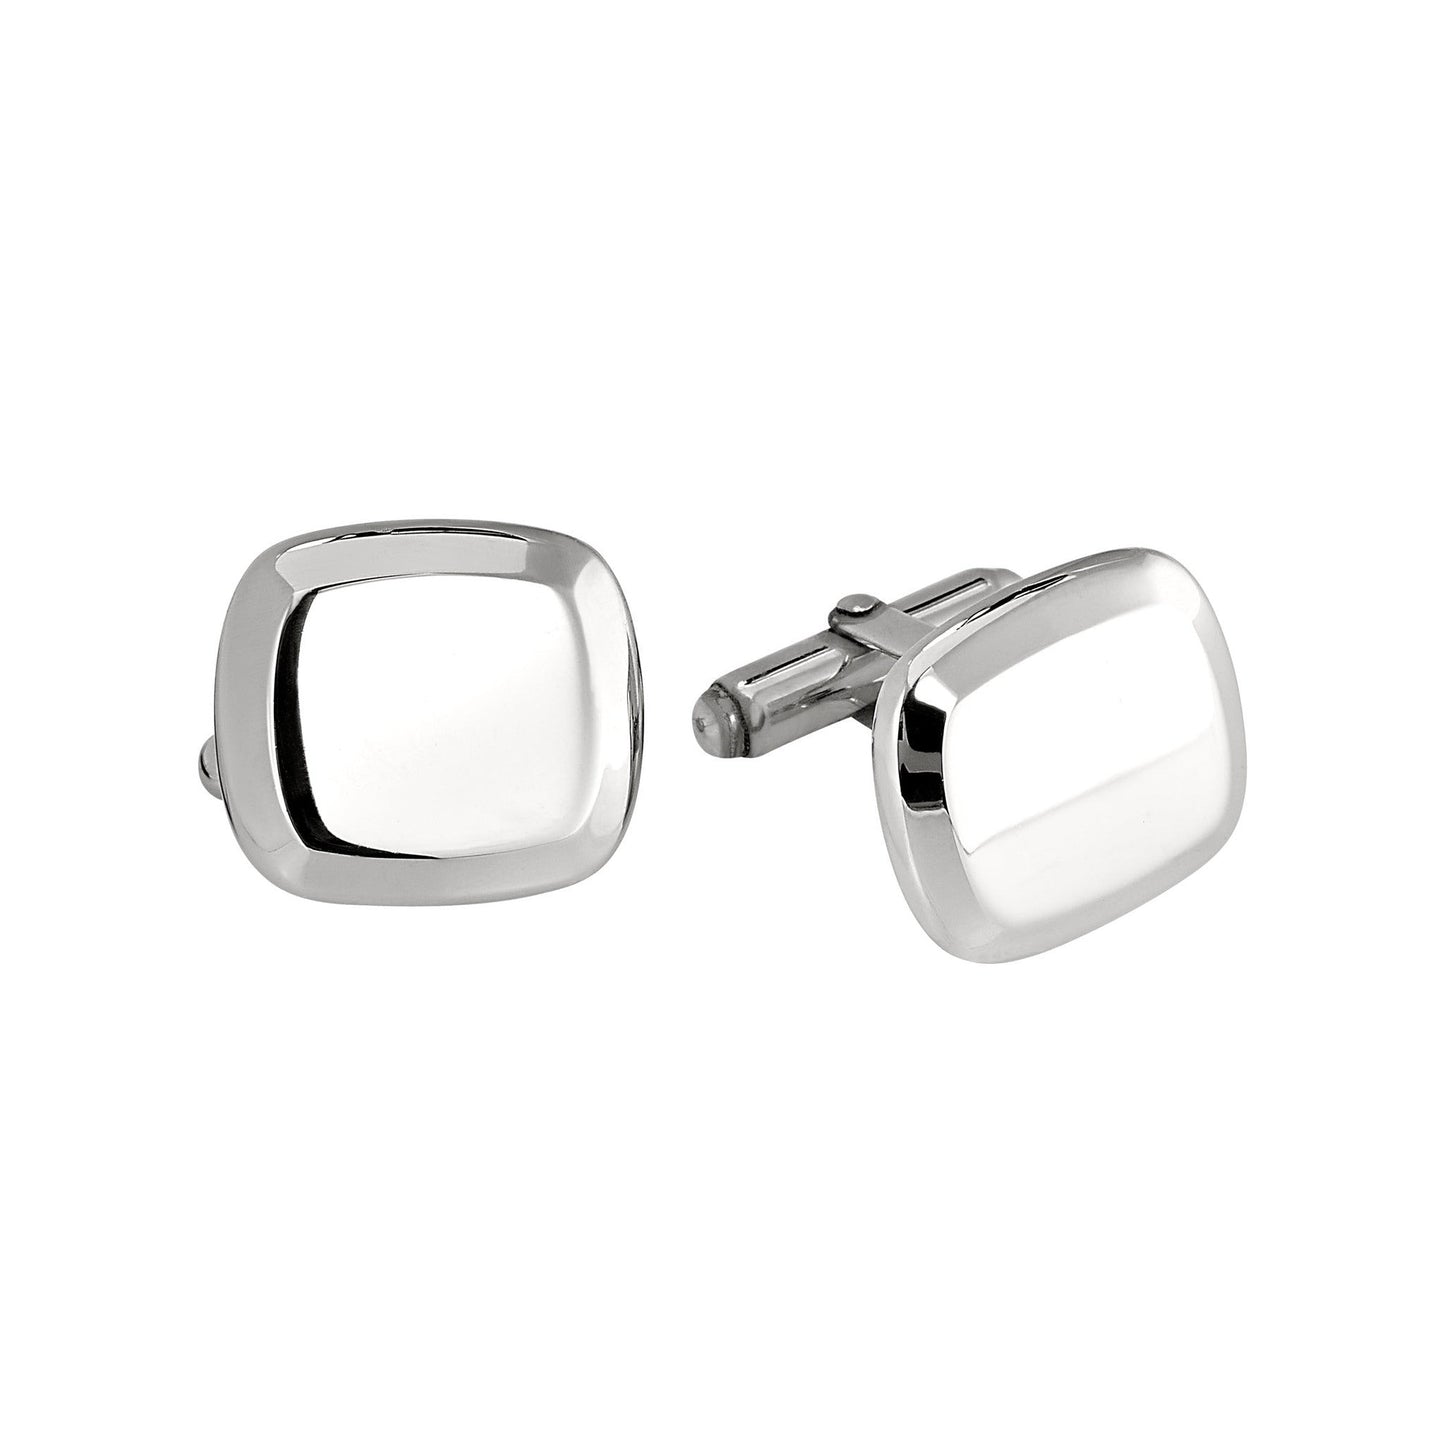 A sterling silver bevel edge cushion polished cufflinks displayed on a neutral white background.